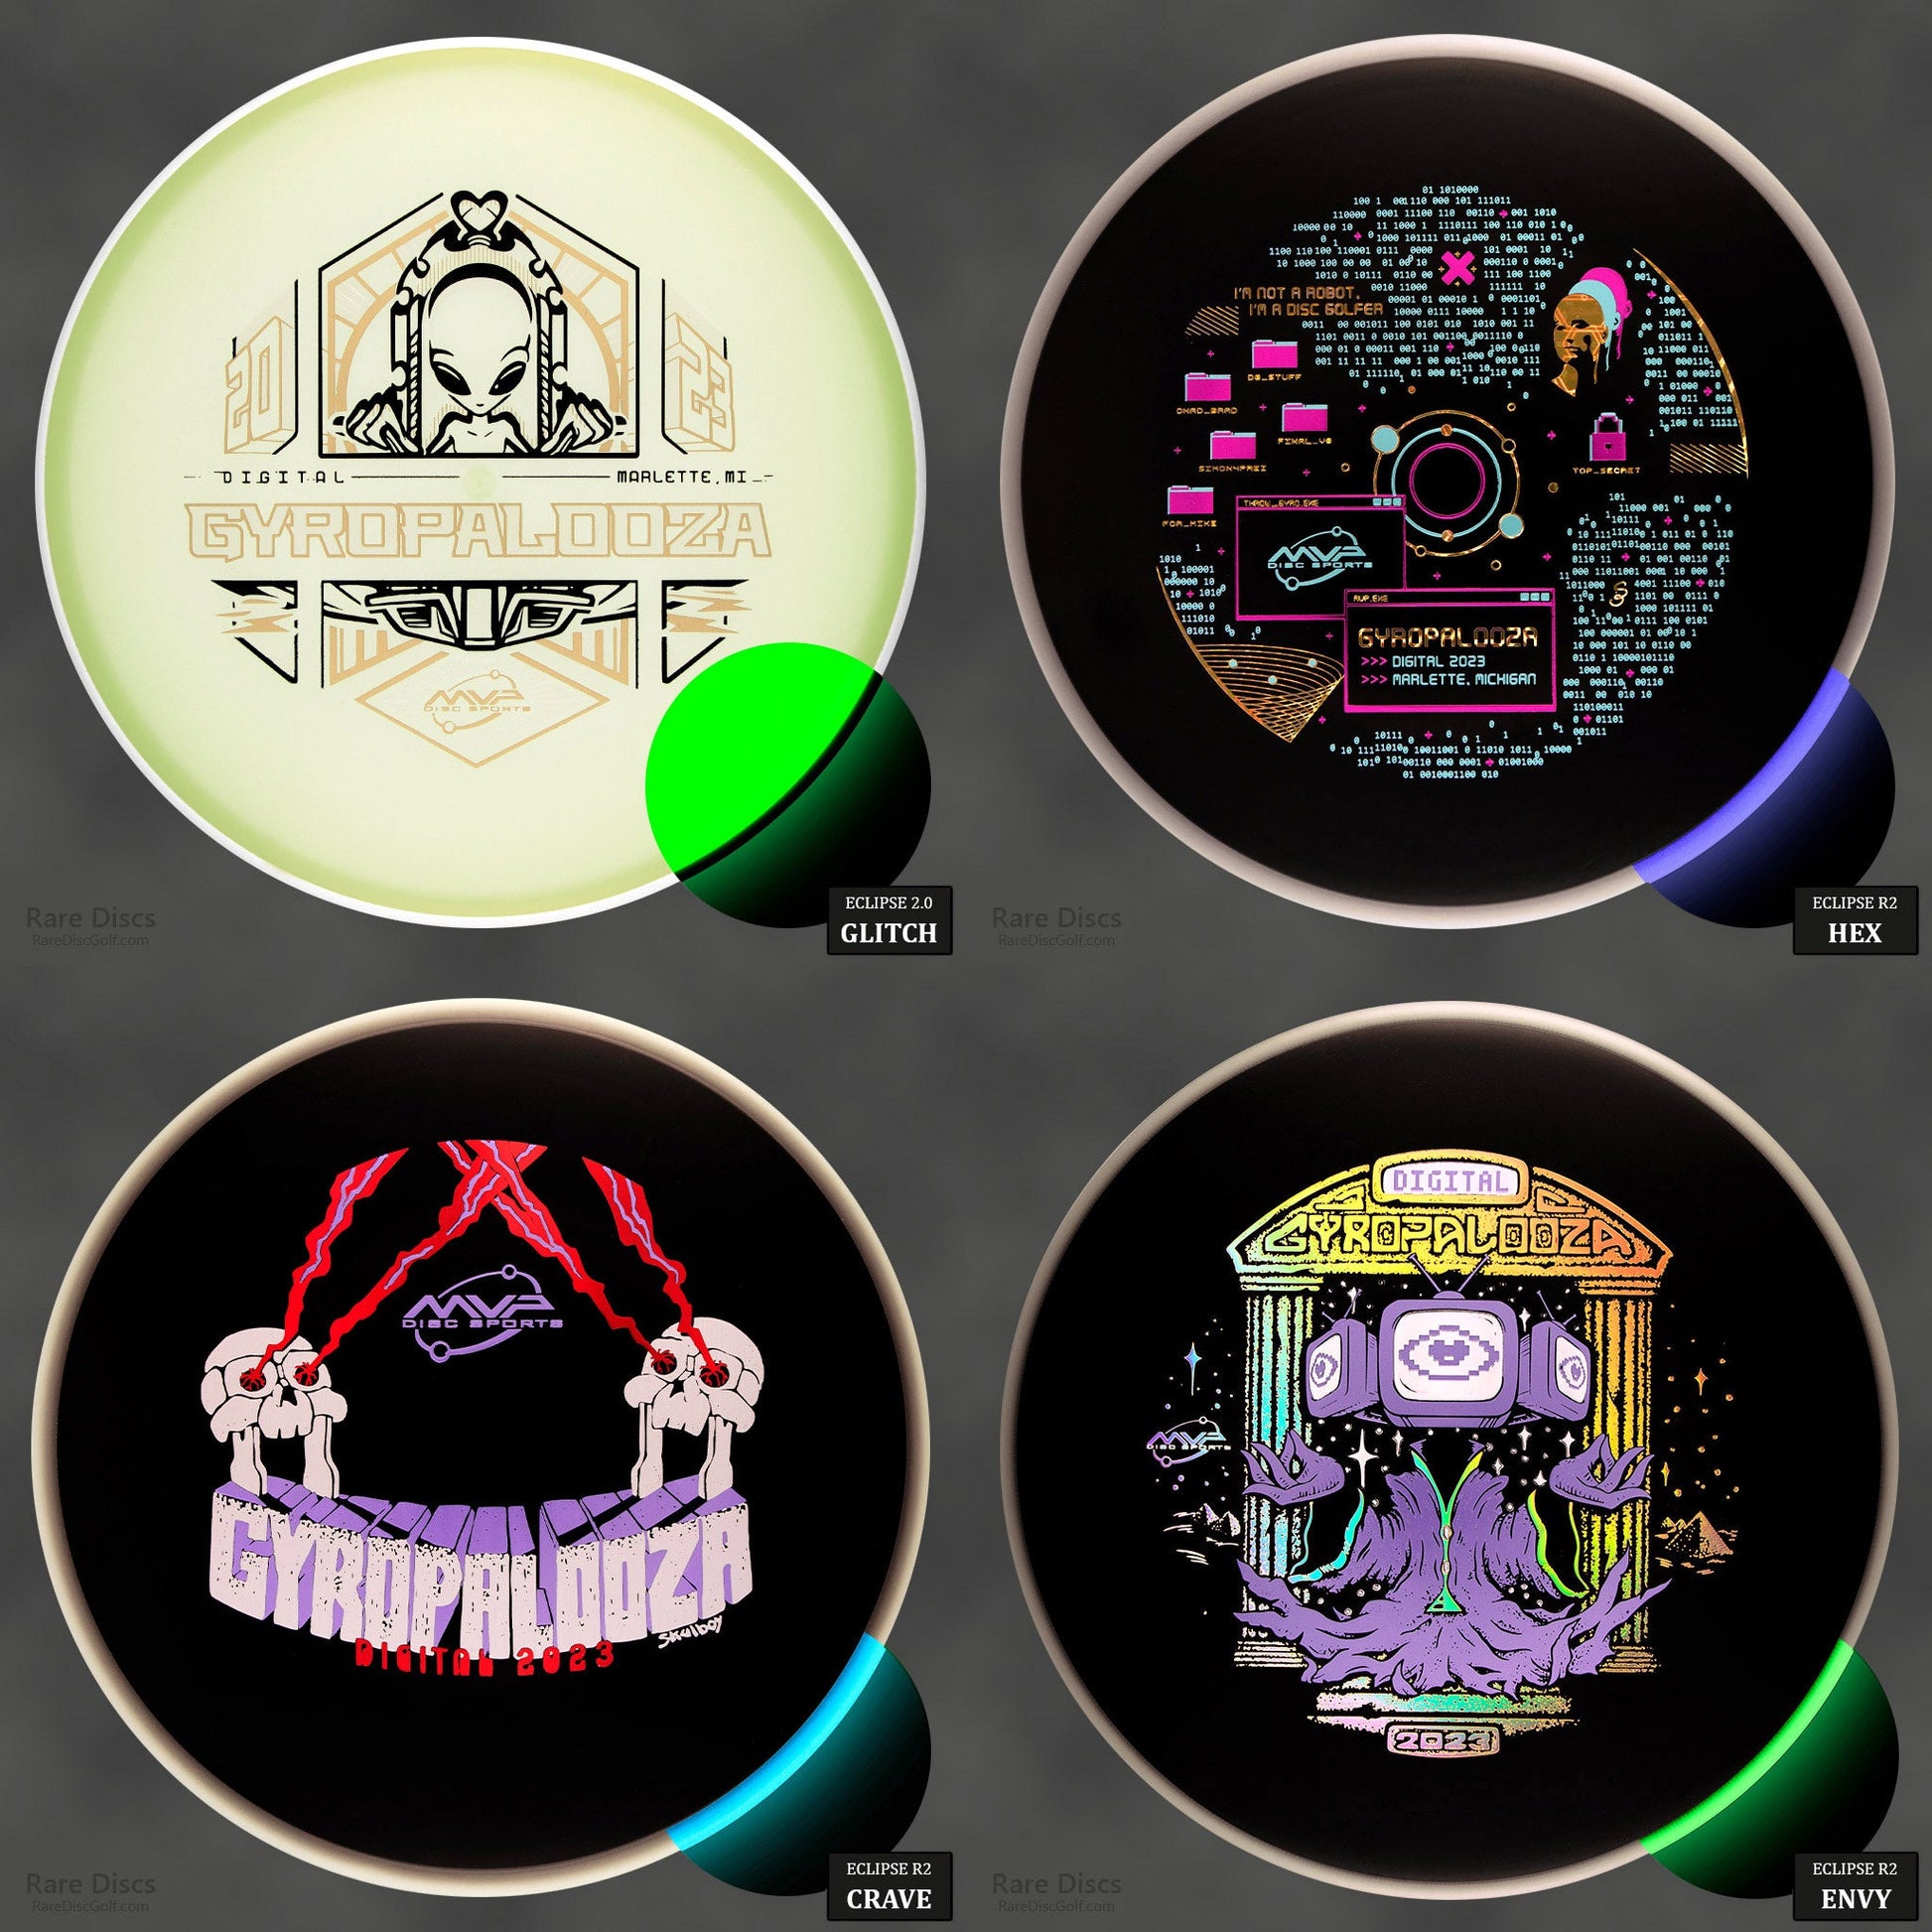 4 of the special edition discs from gyro pack